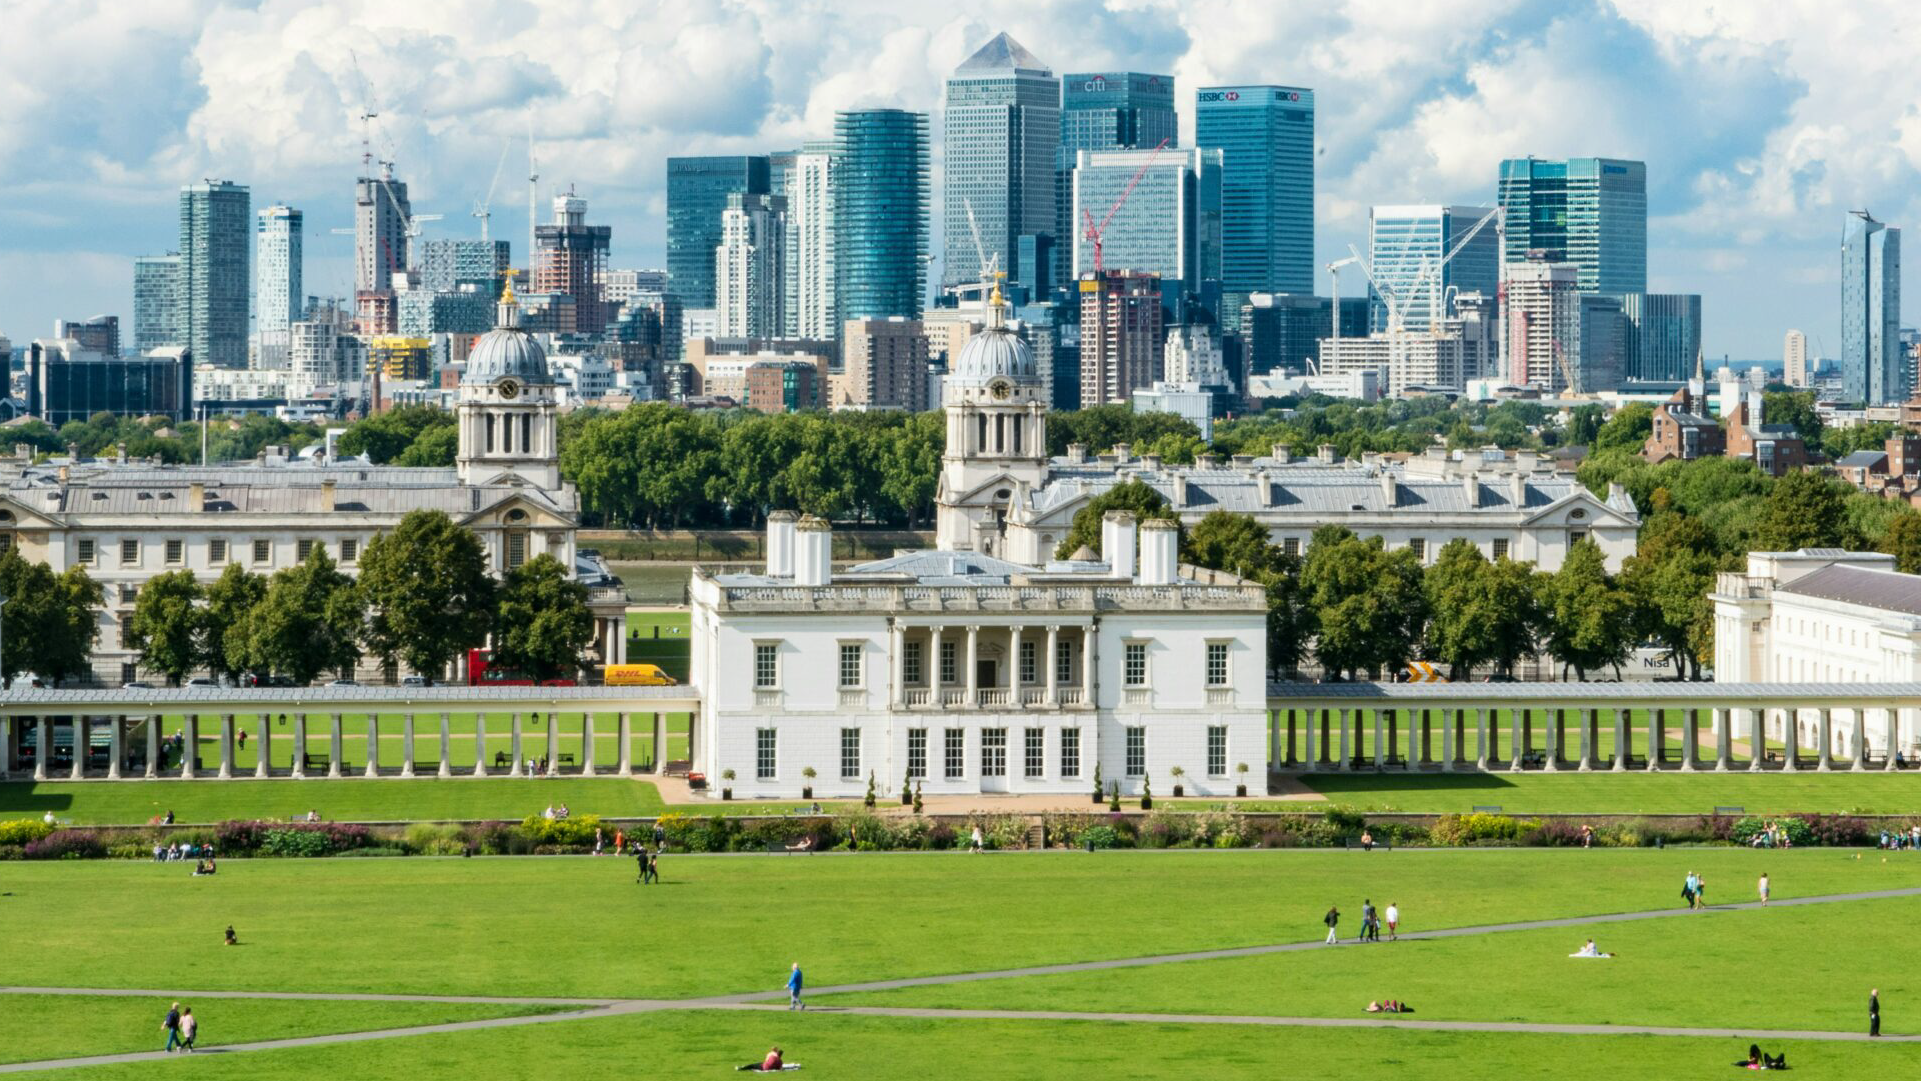 Greenwich Park with a view of Canary Wharf, symbolizing UK's tech growth